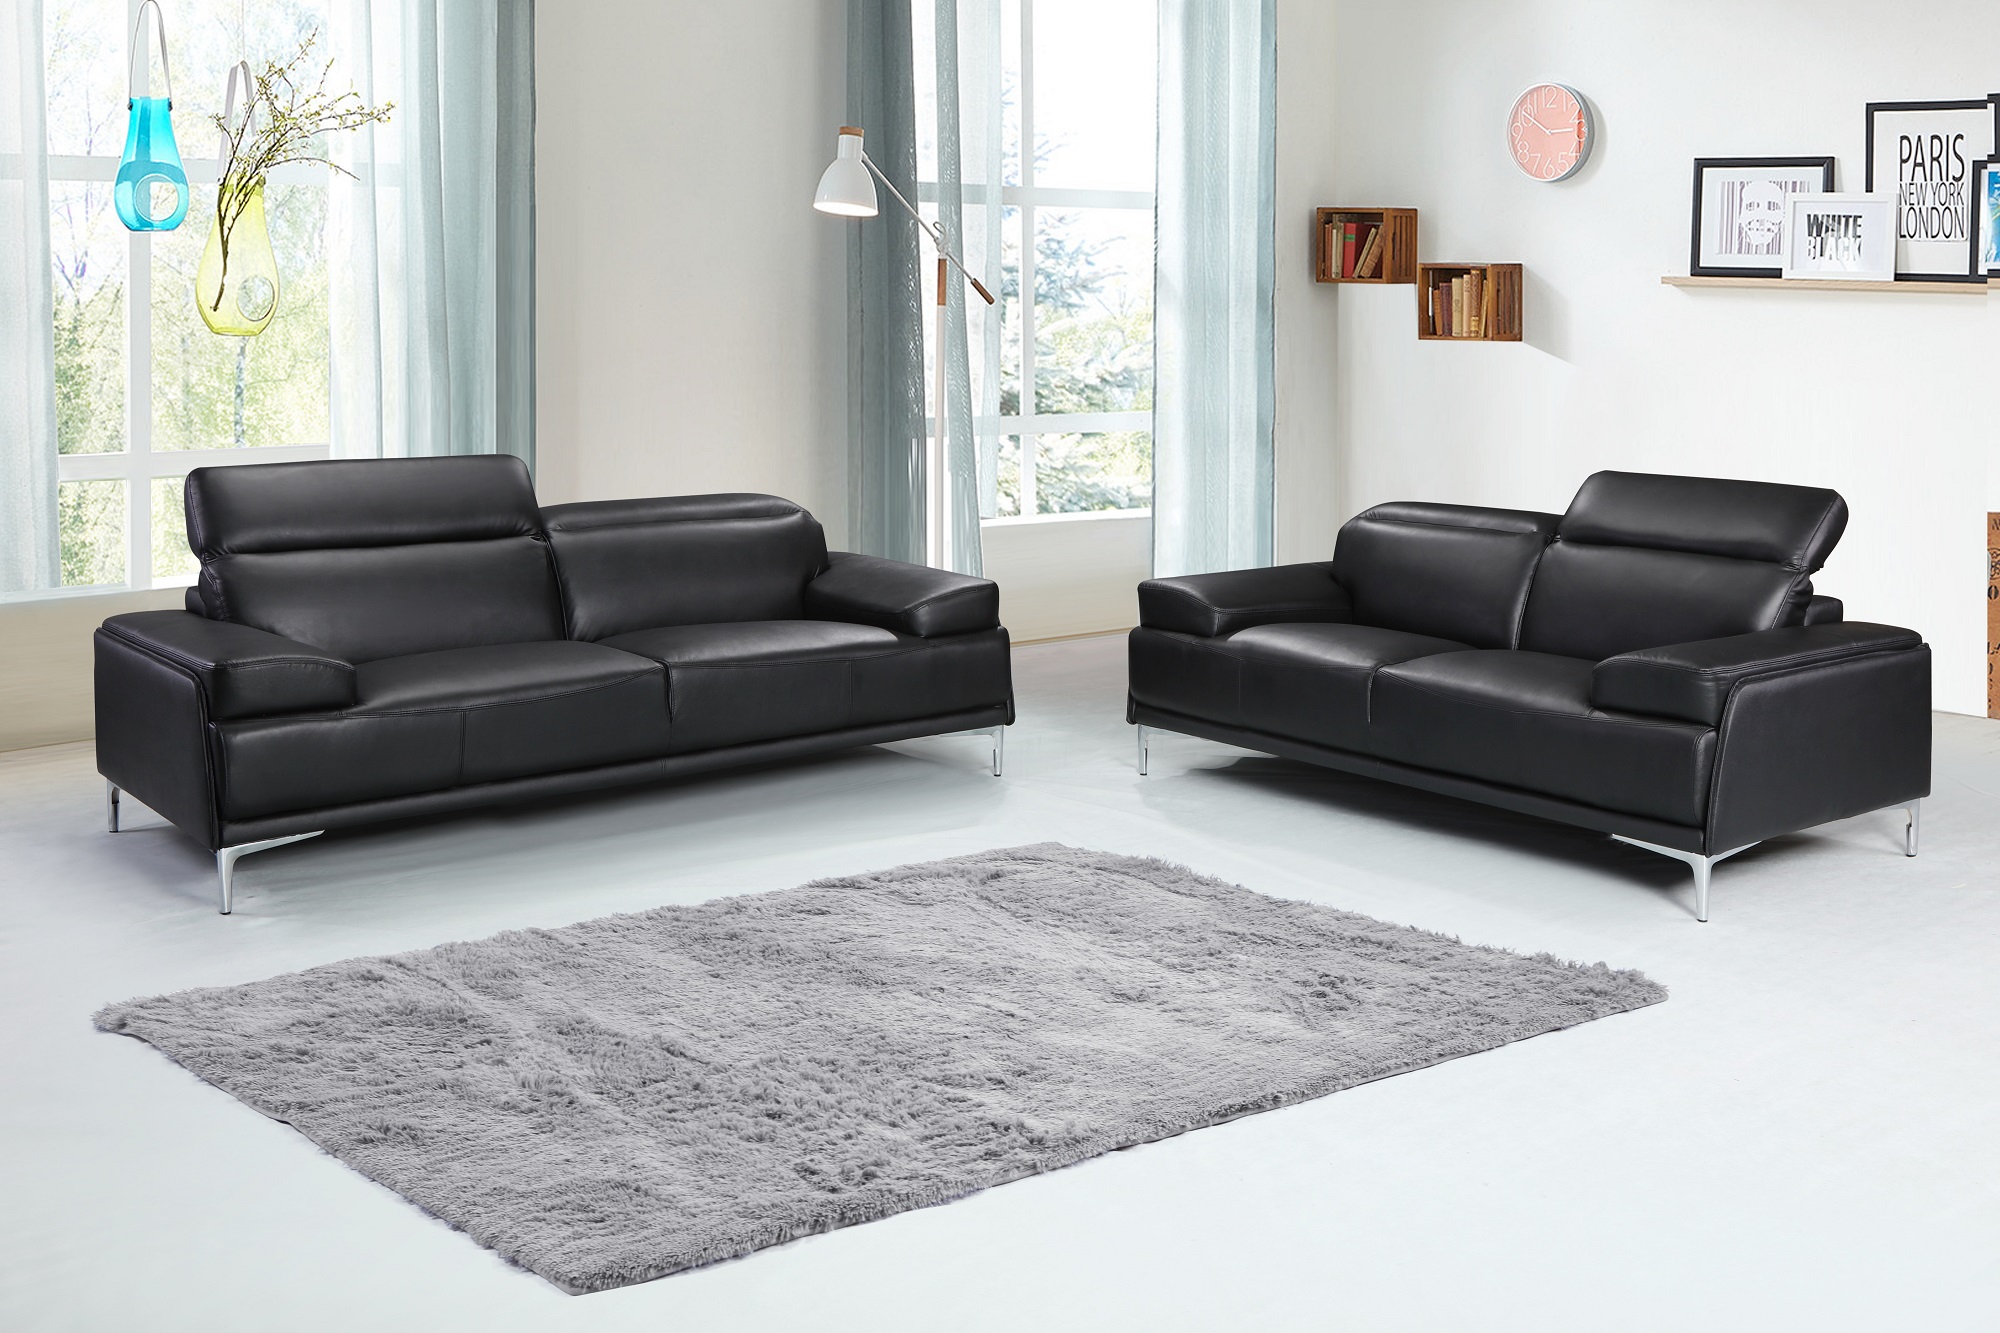 Contemporary Black Leather Living Room, Black Leather Living Room